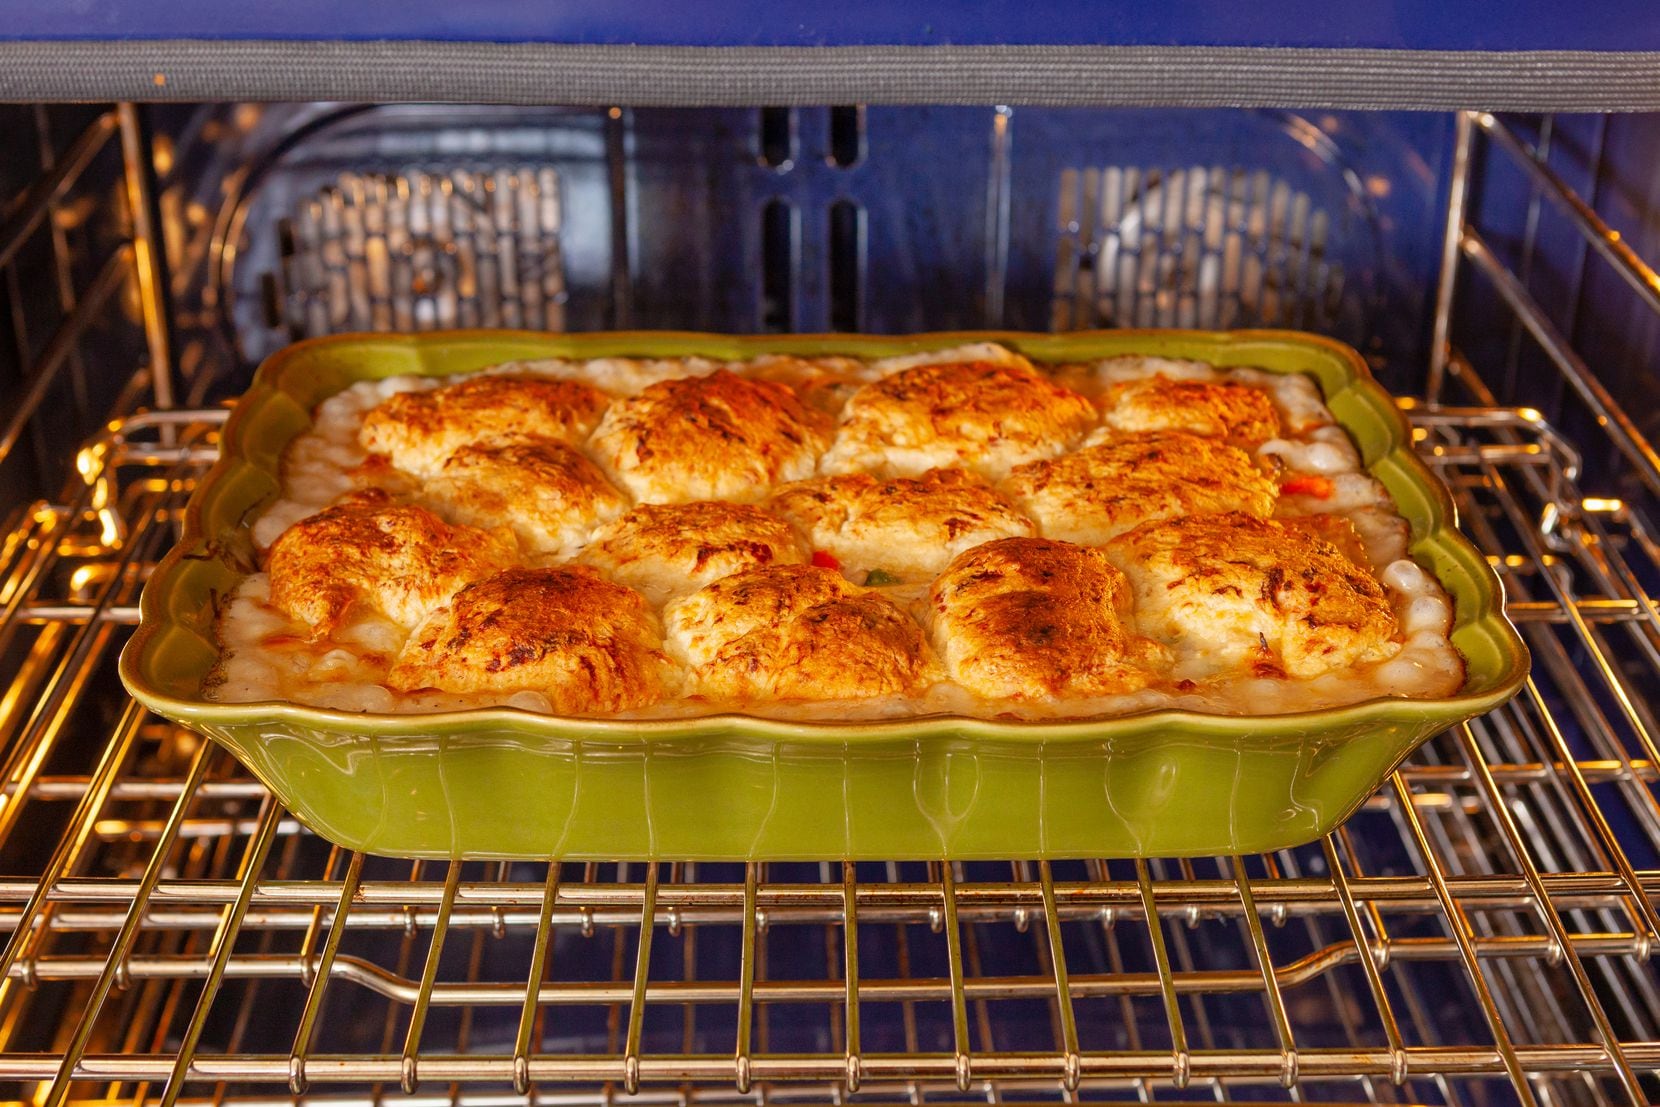 Slow Bone BBQ's Jeffrey Hobbs shares his chicken pot pie recipe in the new cookbook. "My son has always said it was his favorite meal that I prepared at home," he says.